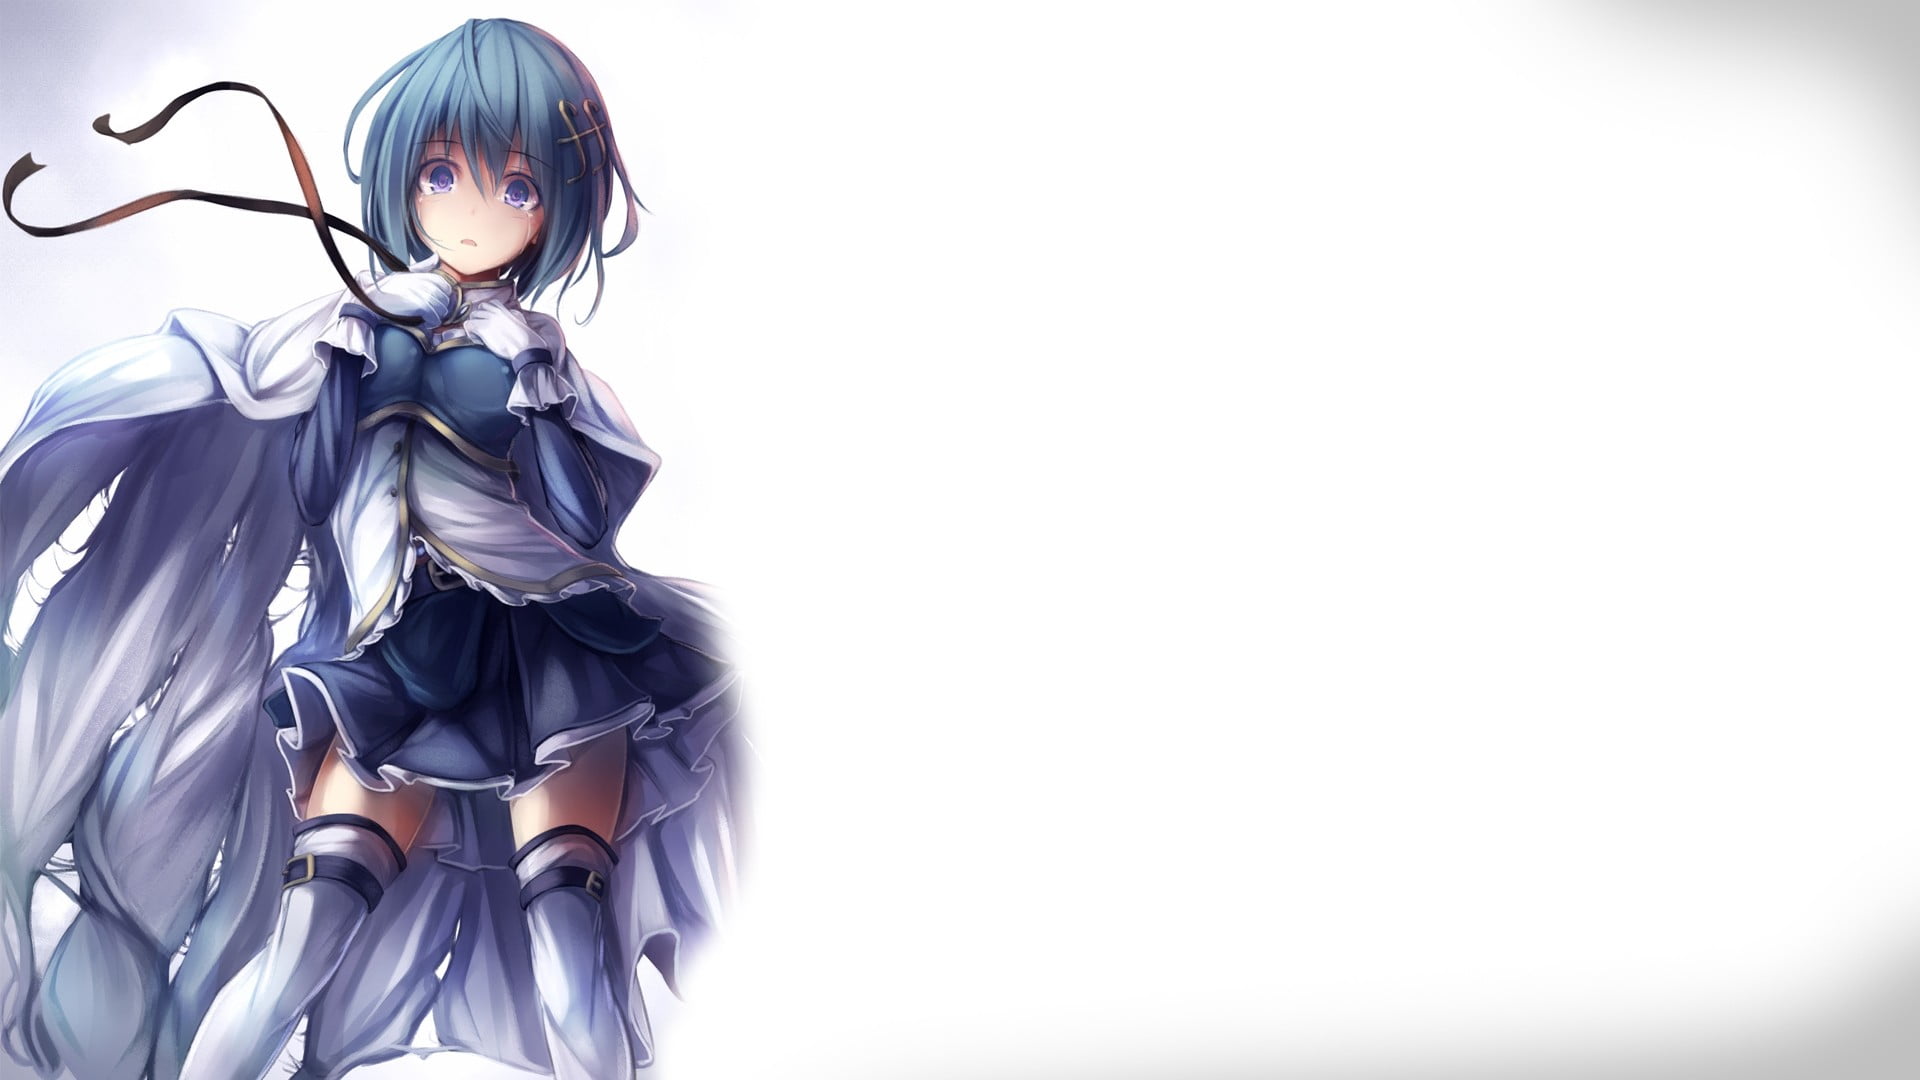 teal-haired girl wearing white and blue dress anime wallpaper